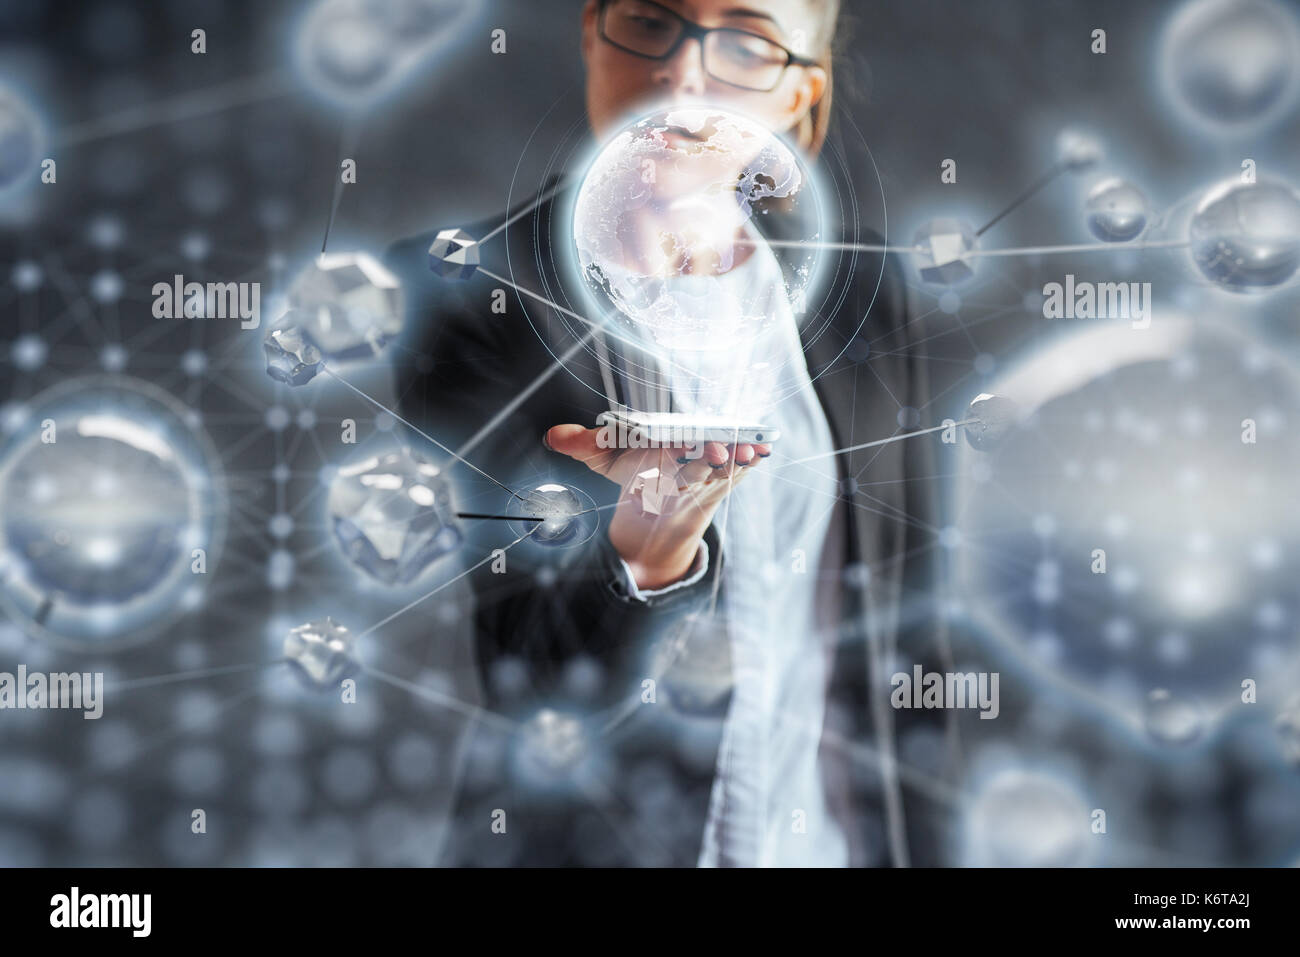 Innovative technologies in science and medicine. Technology to connect. The concept of security Stock Photo